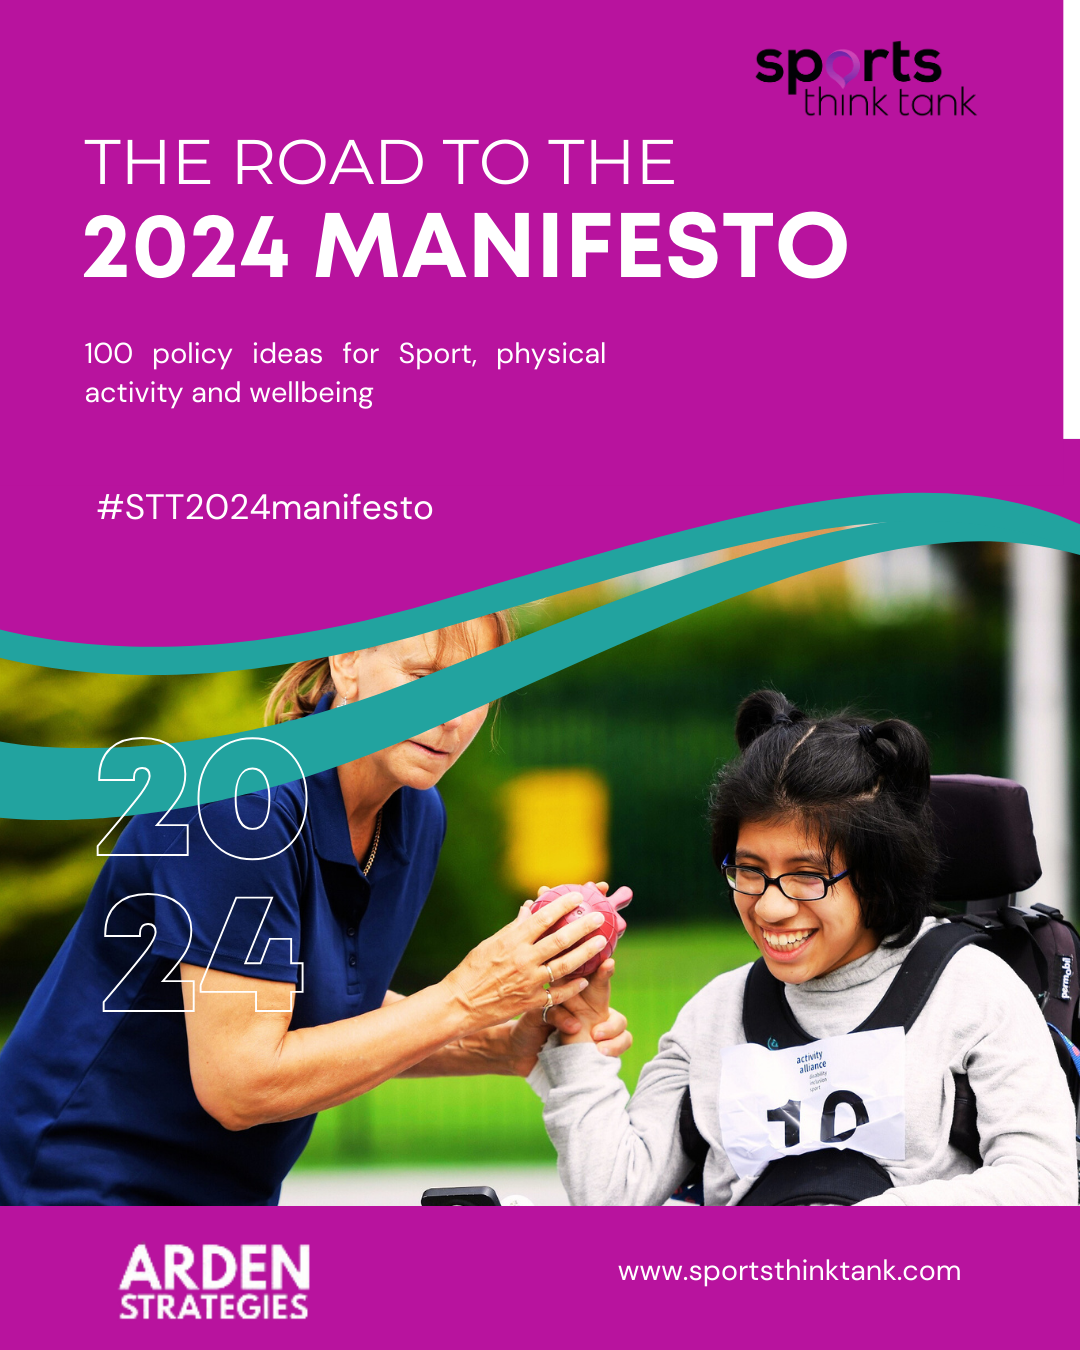 Sports Think Tank: The Road to the Manifestos 2024.